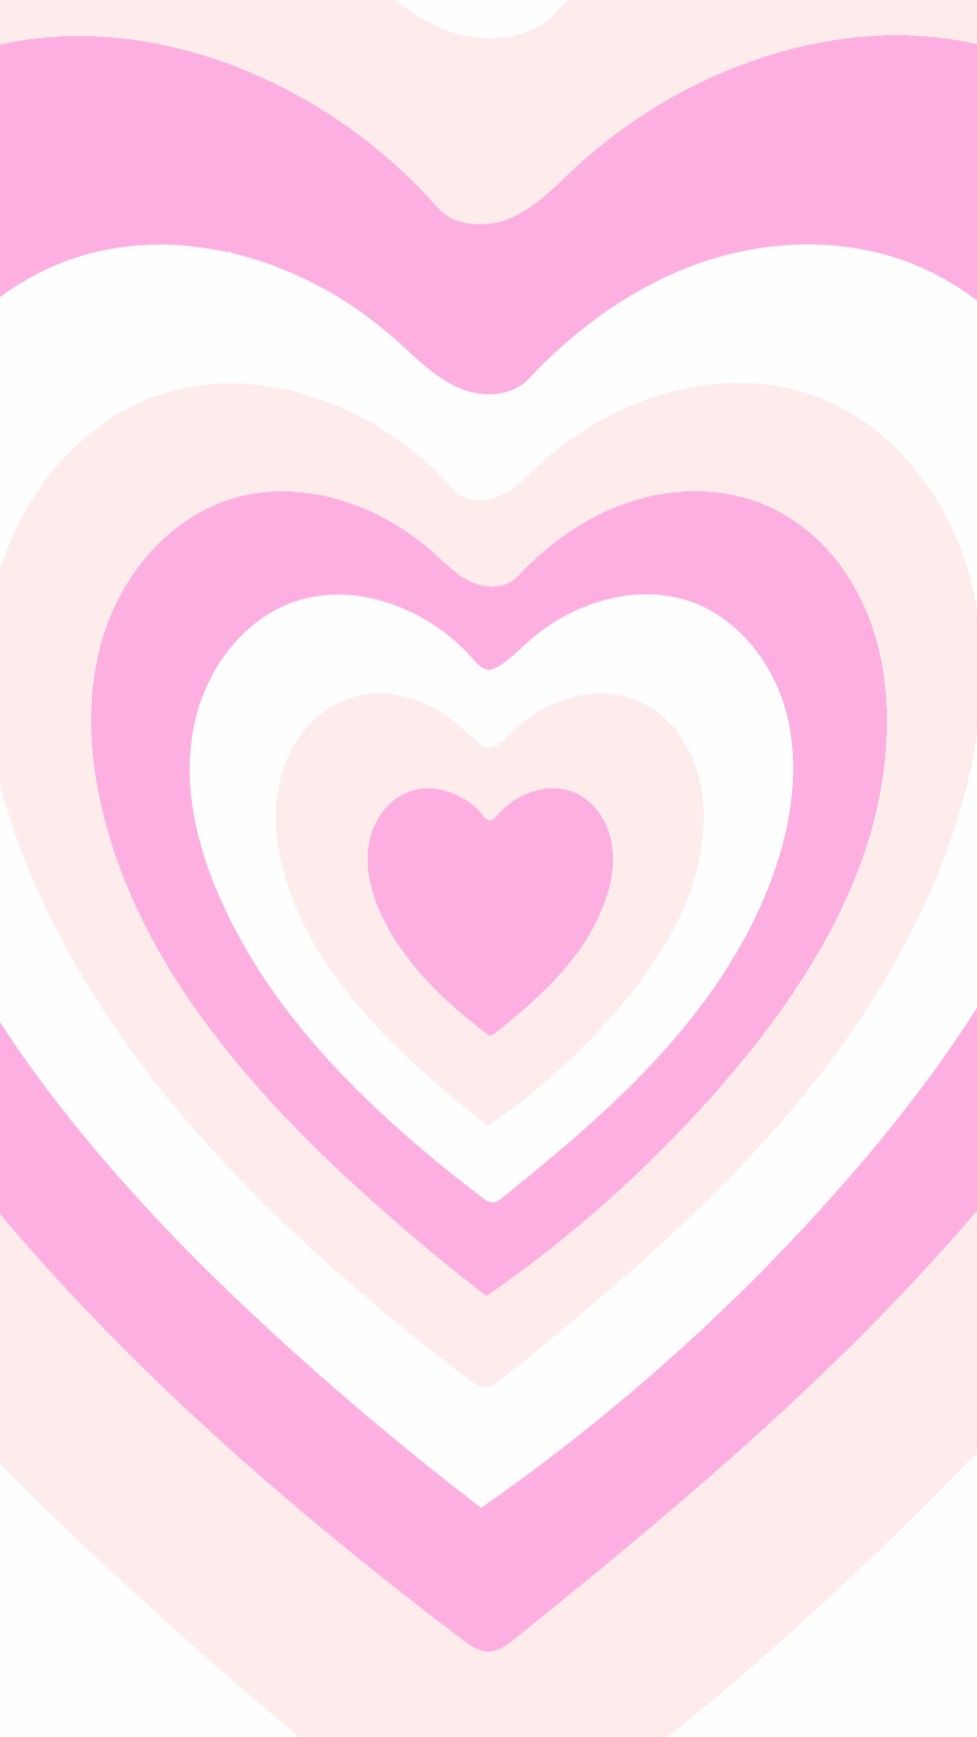 Y2k powerpuff girls pink hearts aesthetic background and phone wallpaper. Heart wallpaper, Aesthetic background, Y2k background